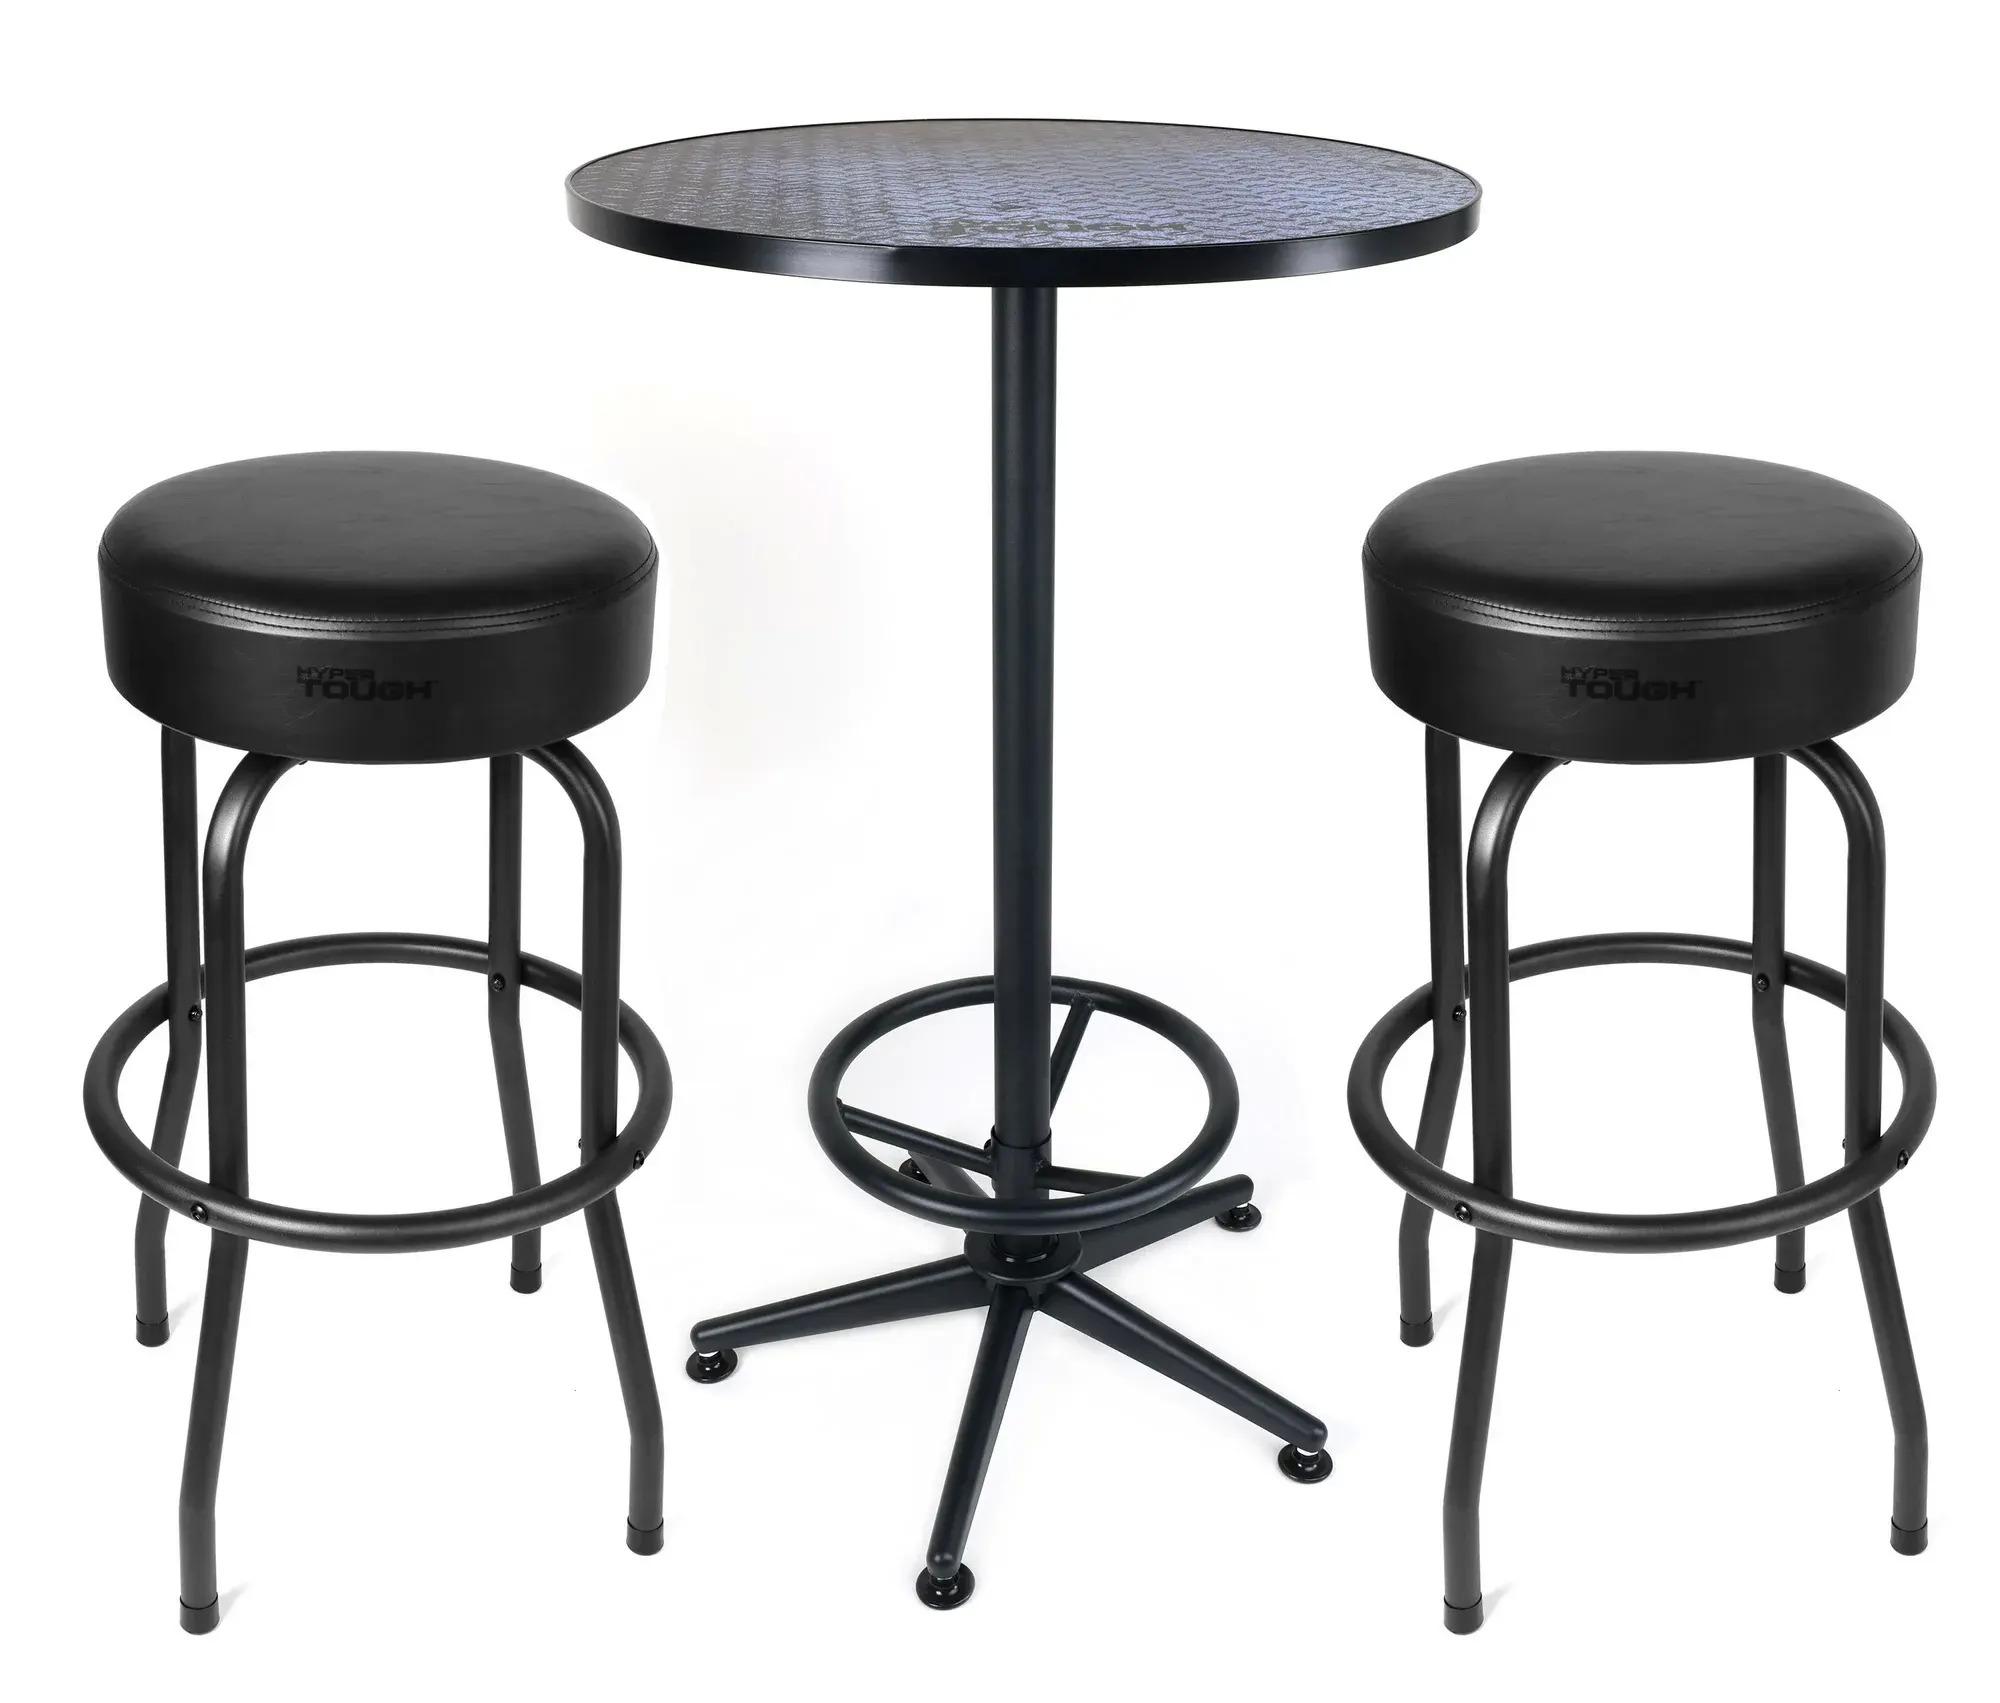 Hyper Tough 3-Piece Shop Table and Stool Set for $68 Shipped